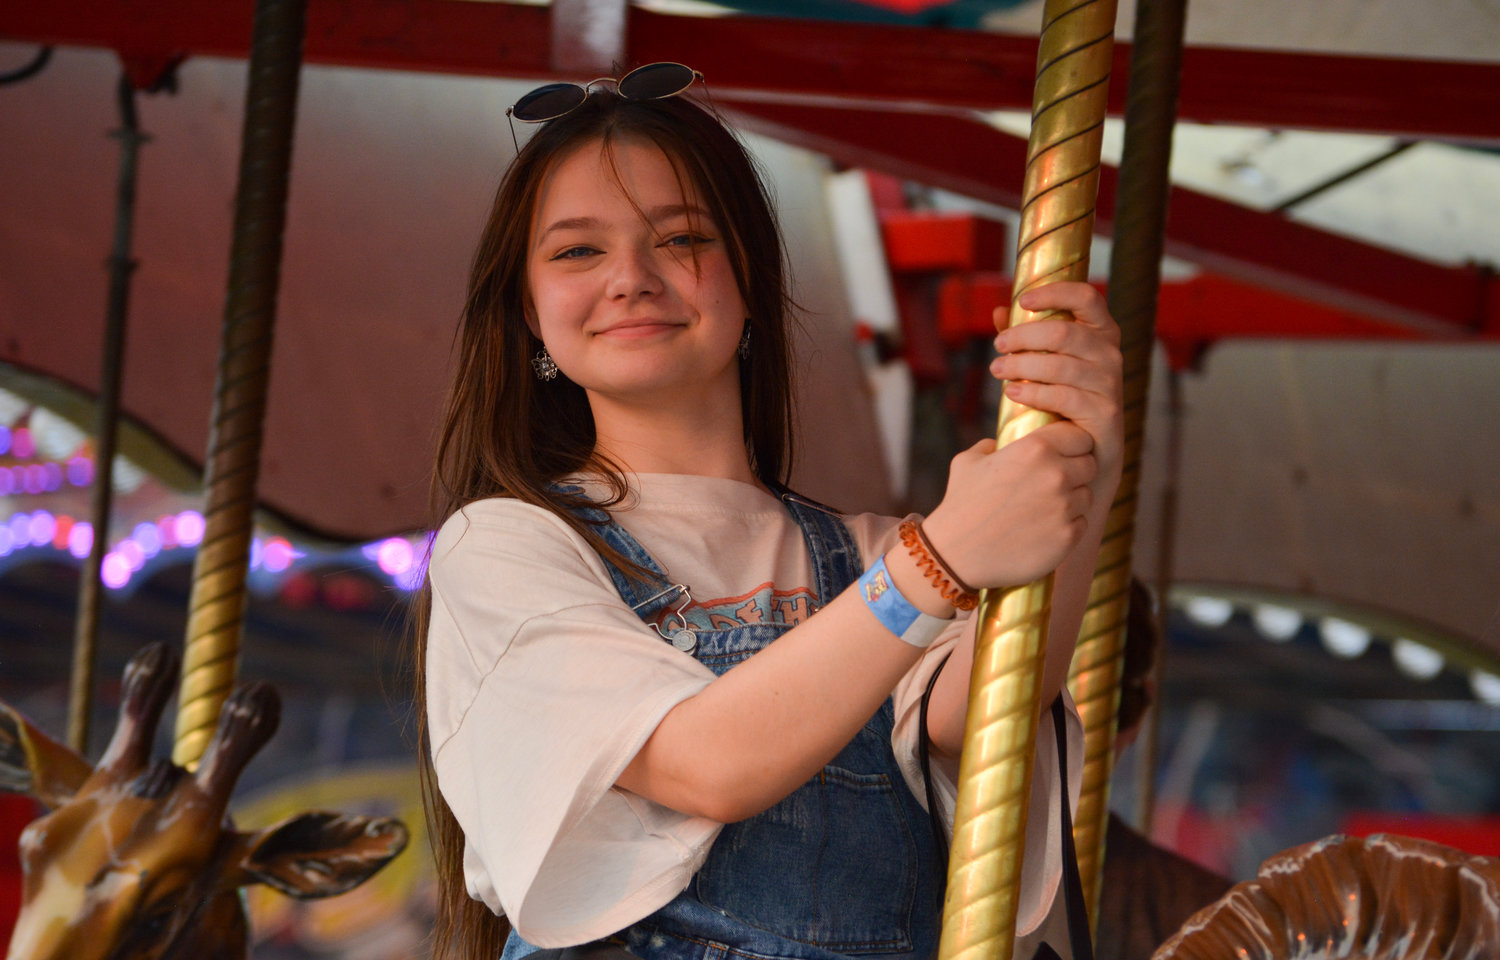 Rylie Edwards, a Clark County resident, rides the carousel with friends on Aug. 13 at the Clark County Event Center at the Fairgrounds.